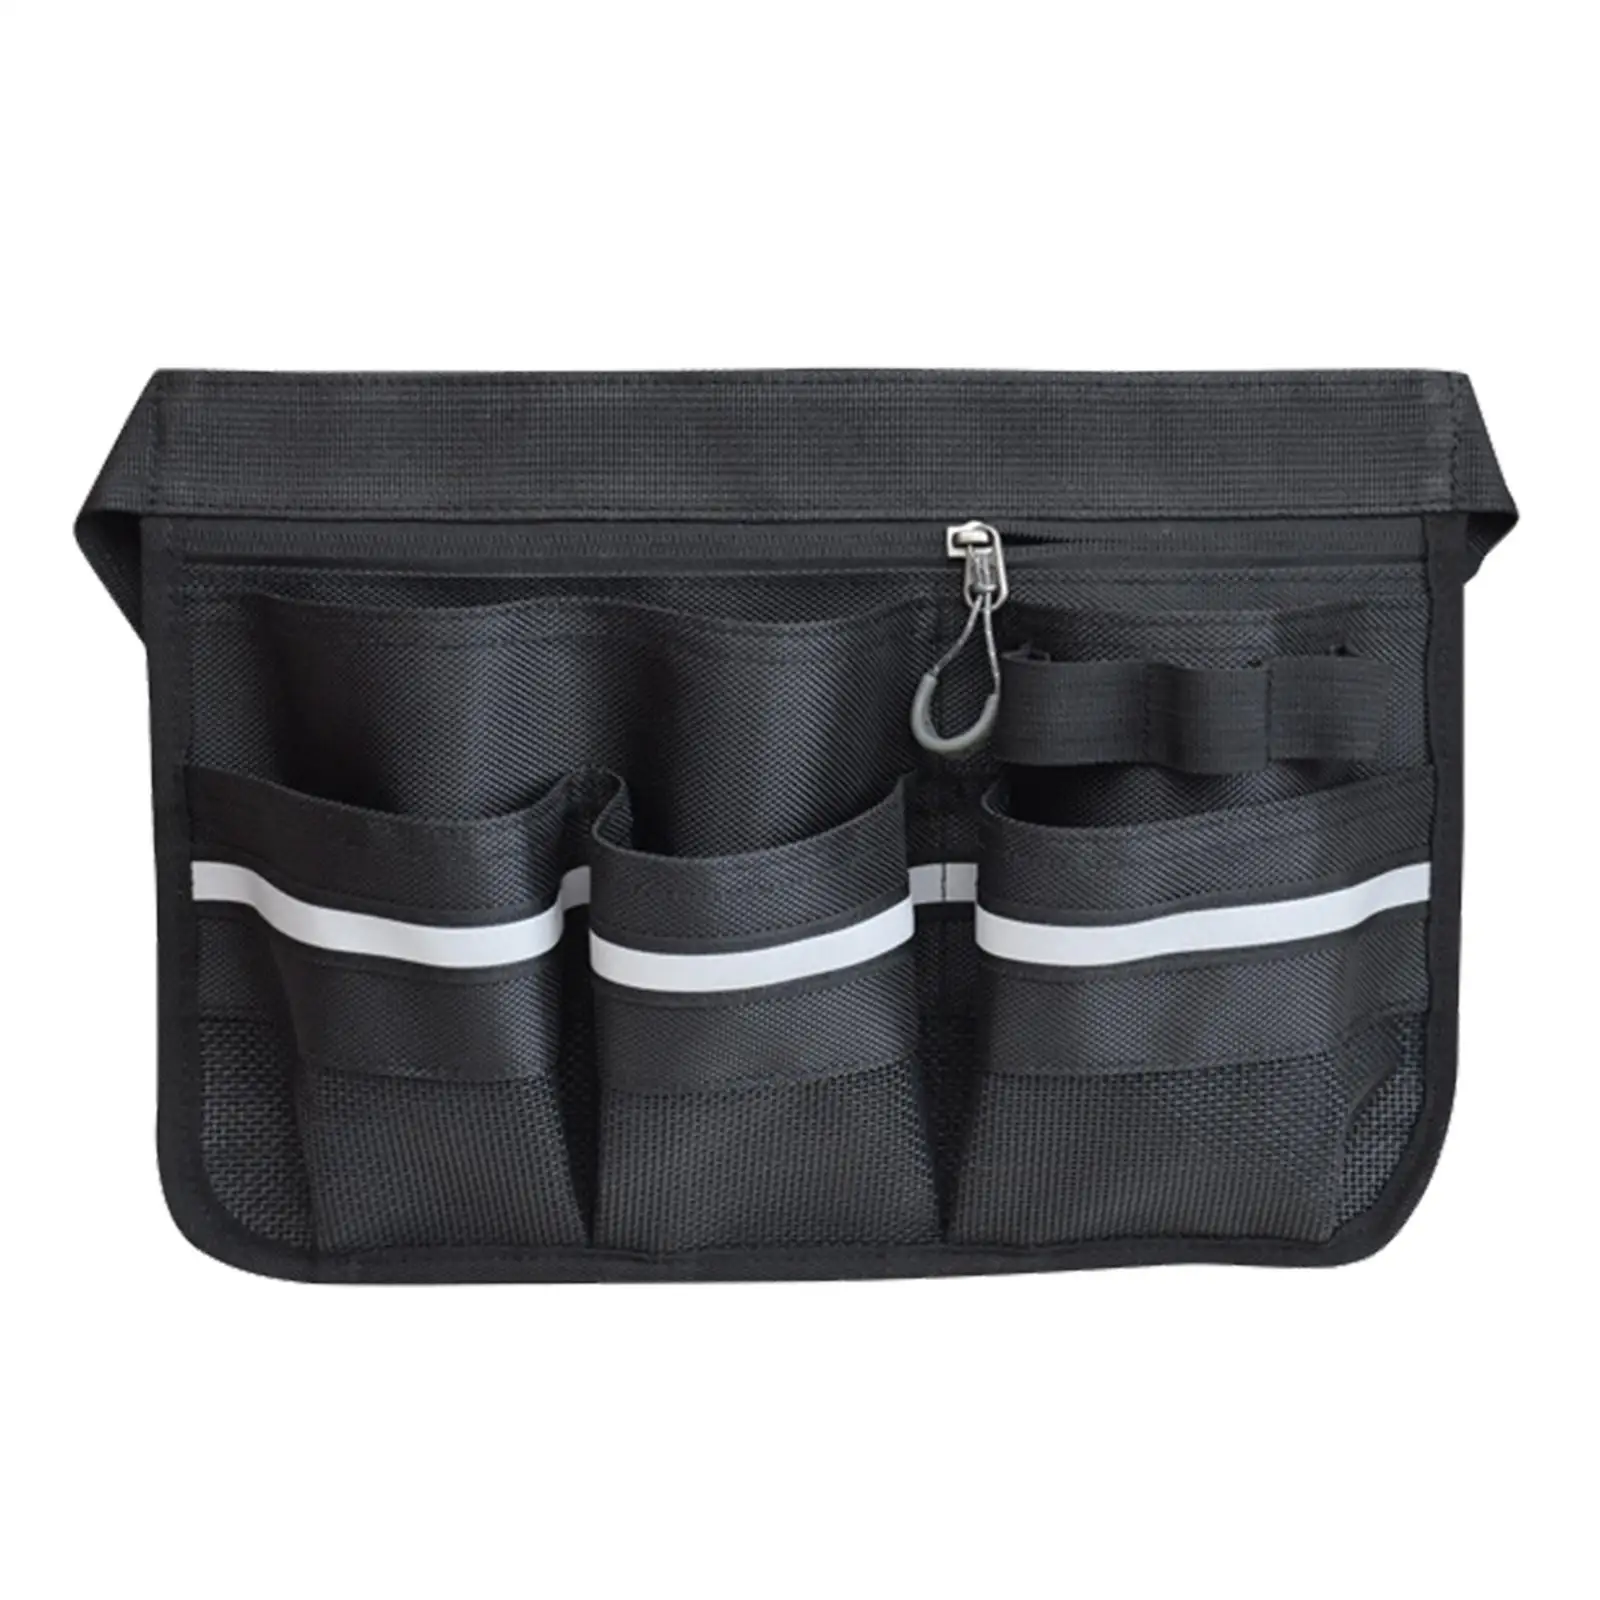 Tool Bag Oxford Cloth with Pockets Waiter Storage for KTV Cleaning Catering